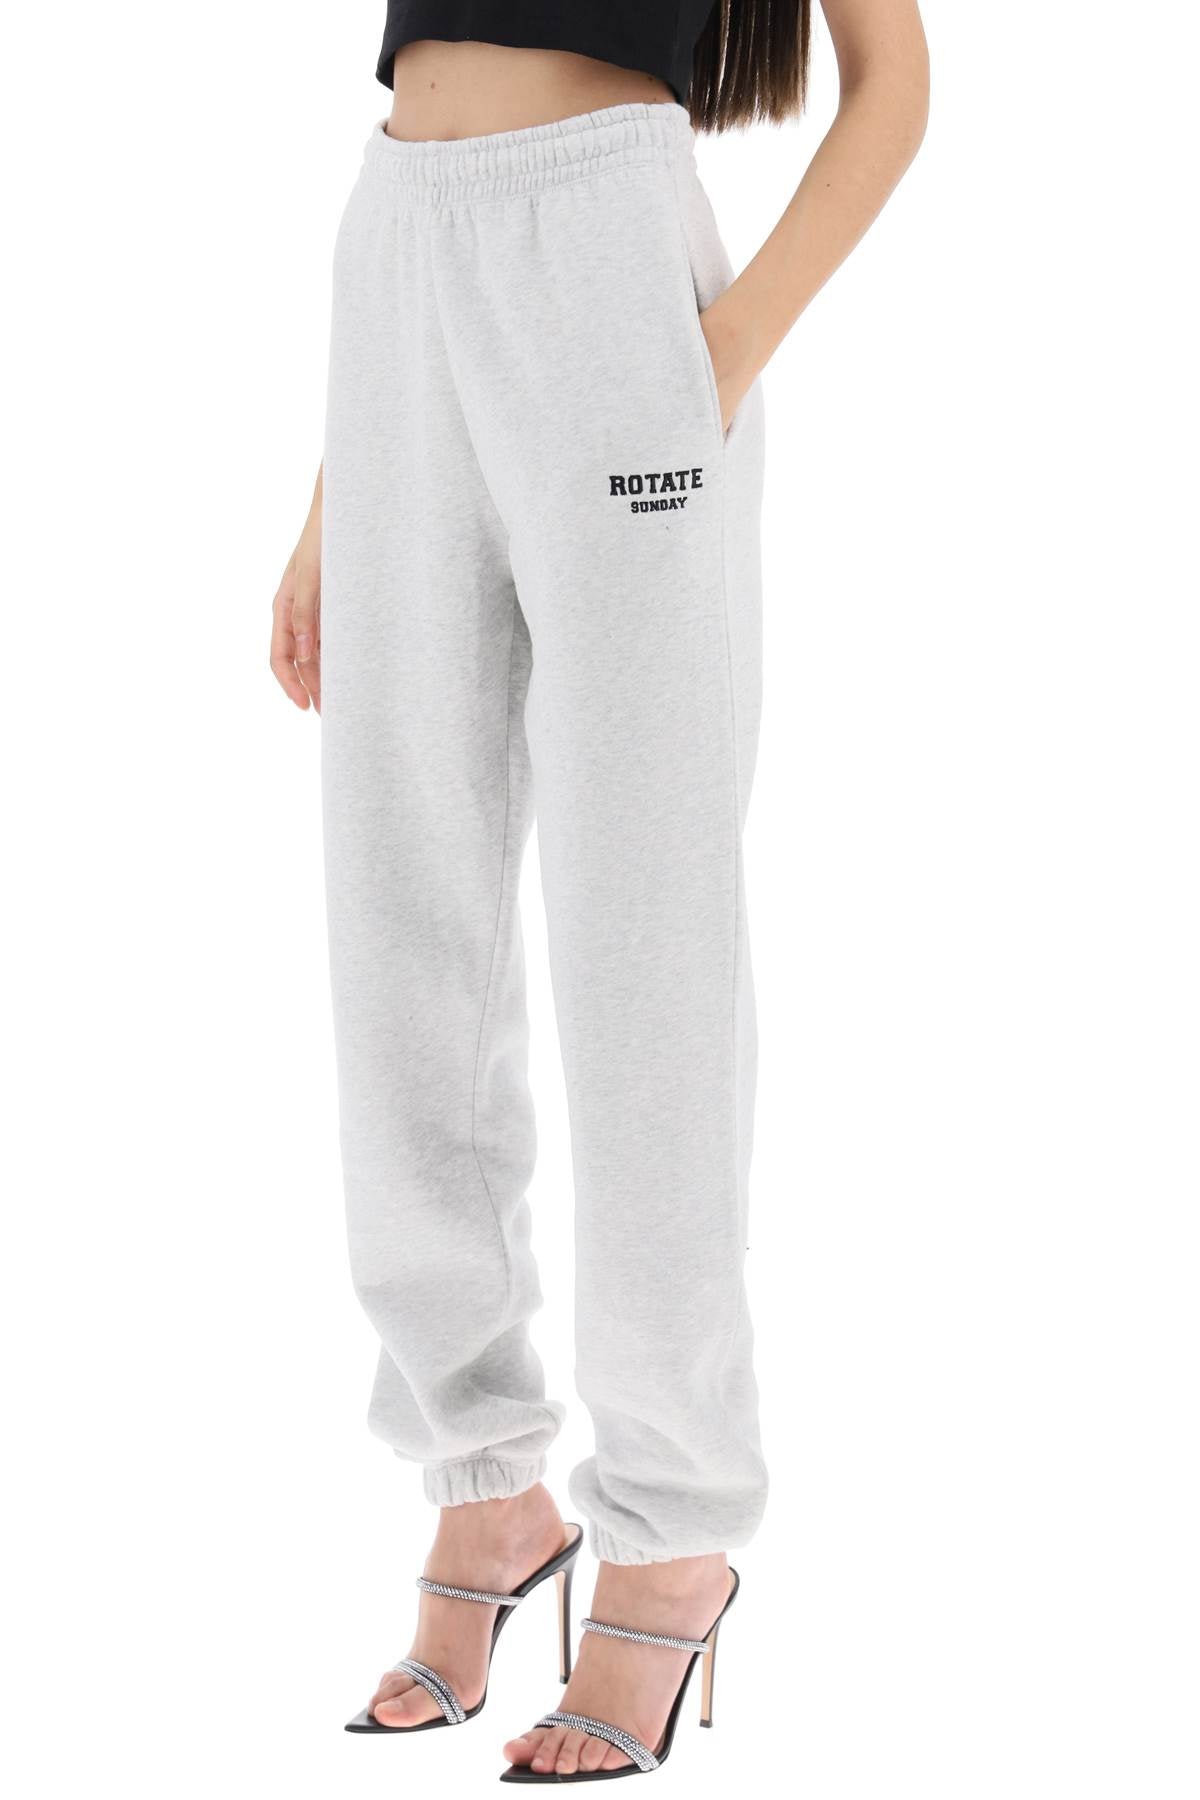 Rotate joggers with embroidered logo-women > clothing > trousers-Rotate-m-Grey-Urbanheer